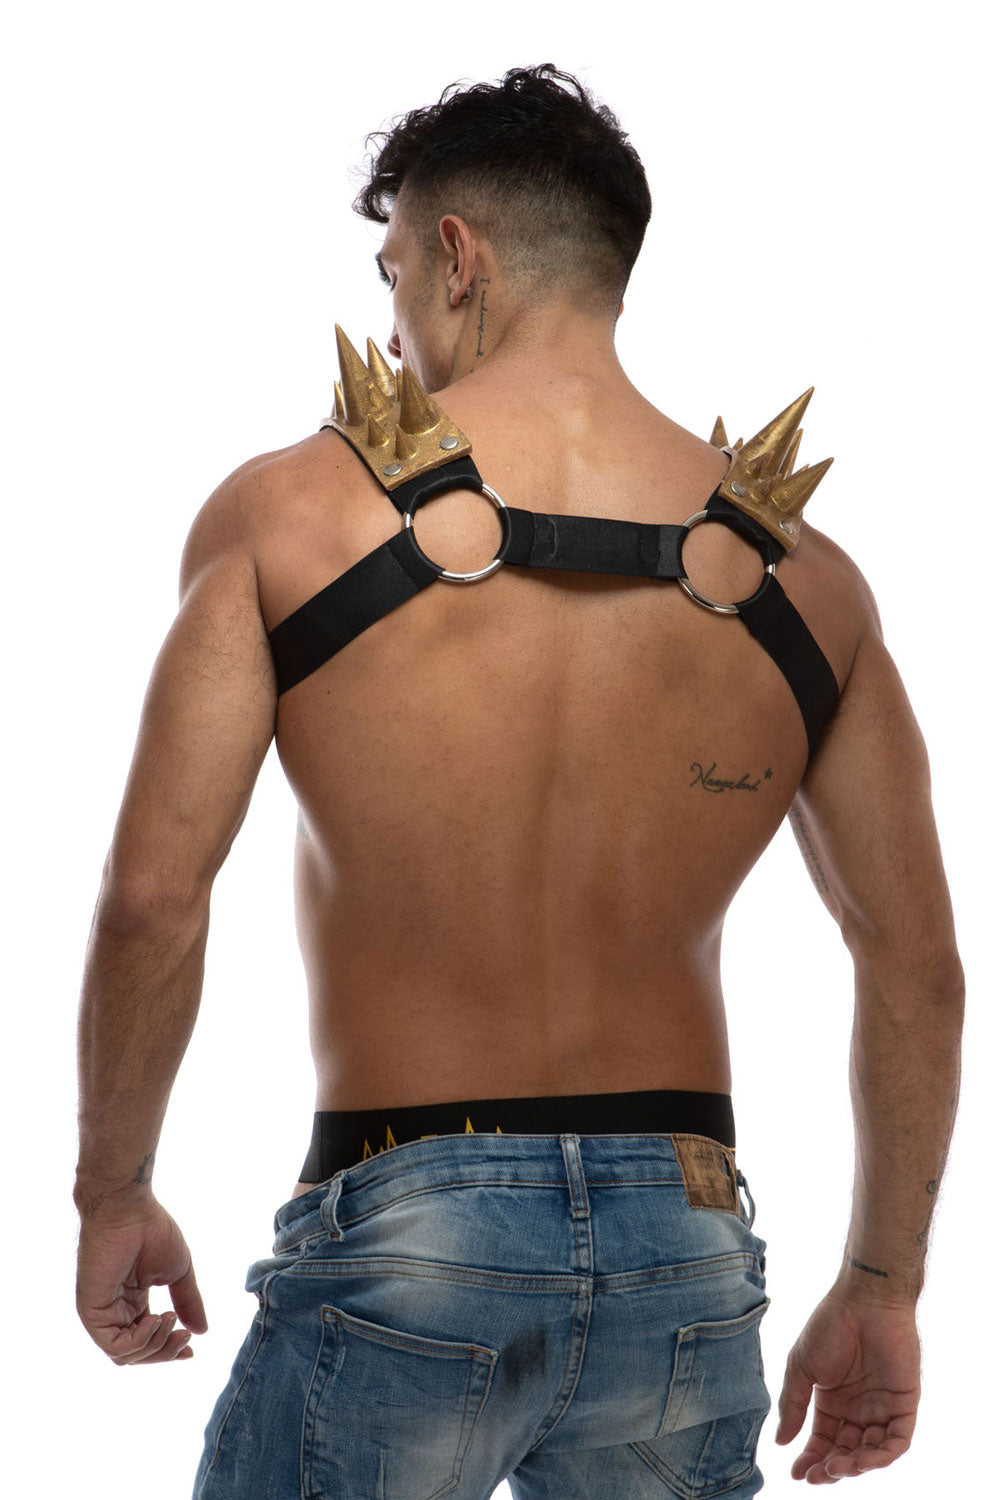 Blades | Spiked Harness | Gold